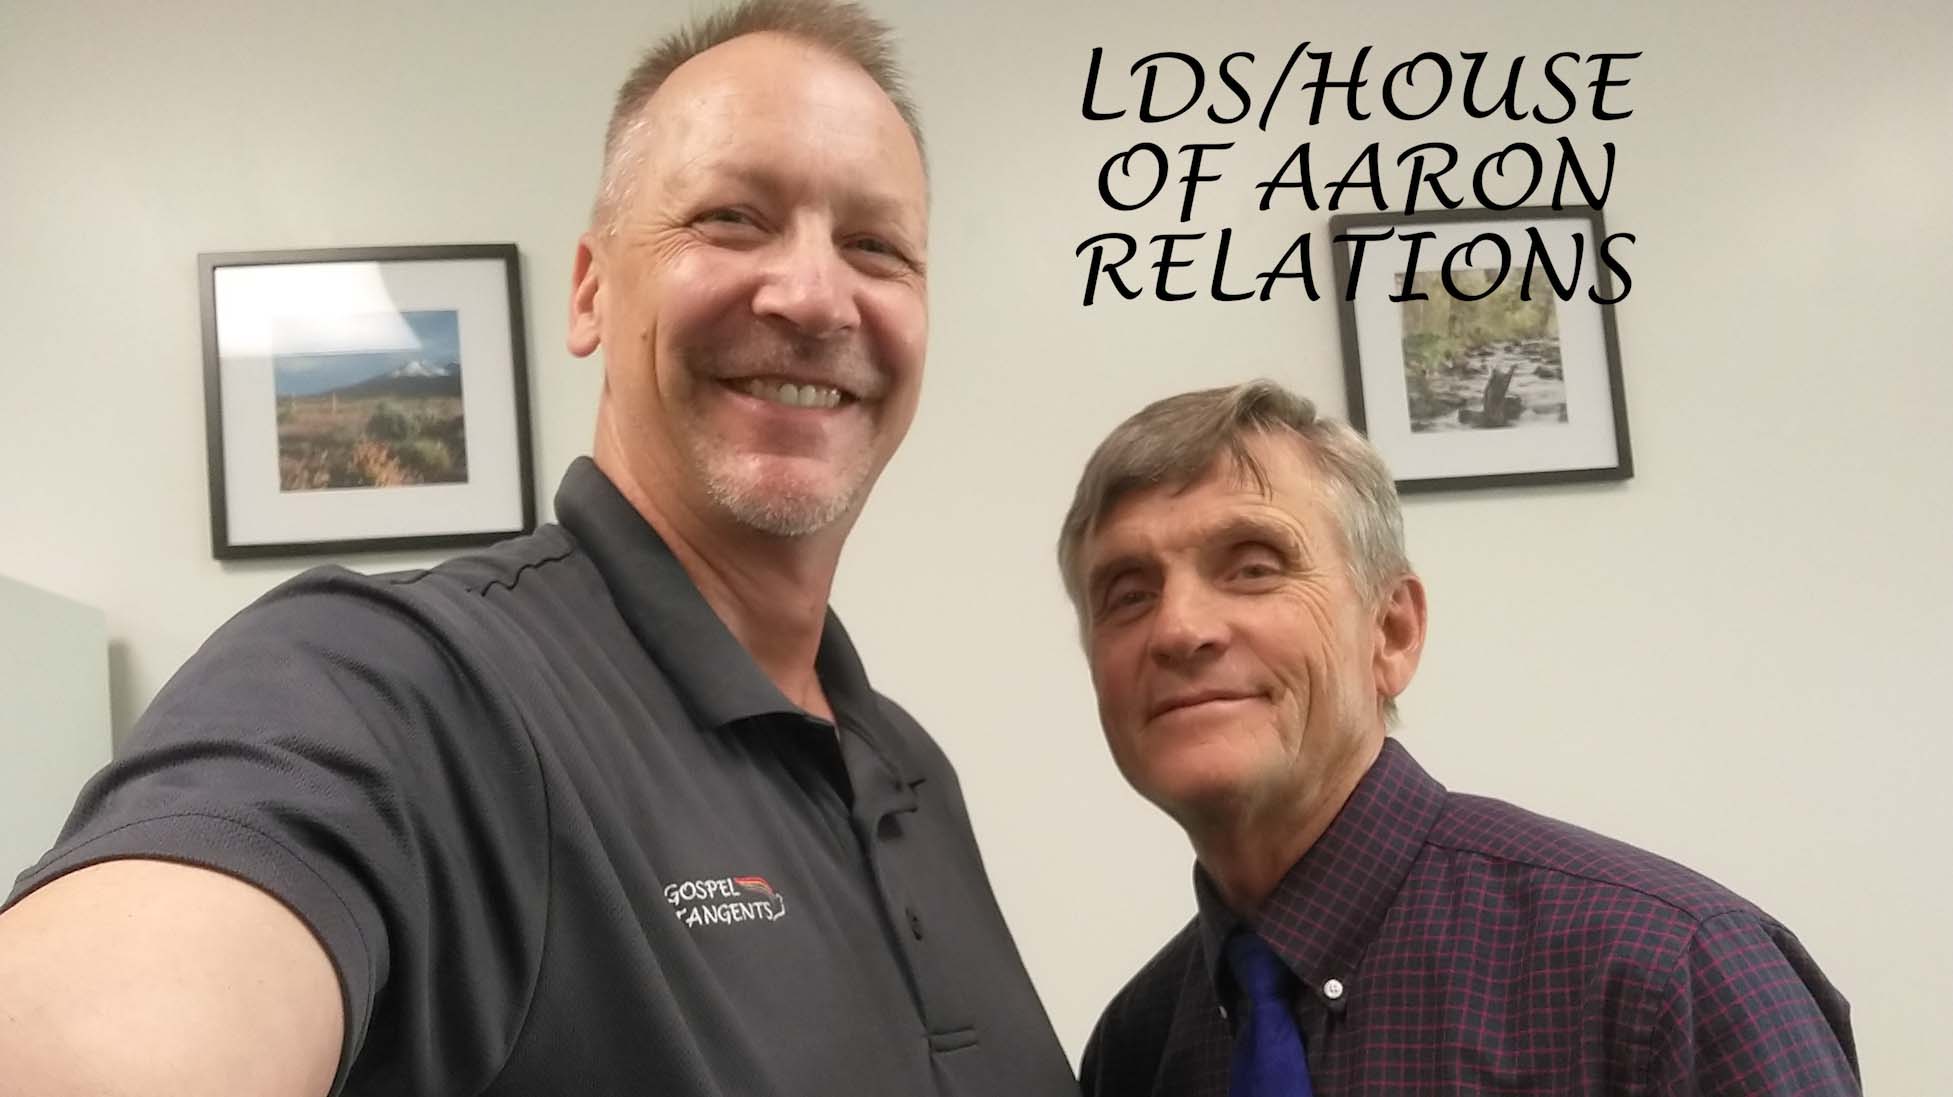 - LDS/House of Aaron Relations (Part 2 of 5) - Mormon History Podcast